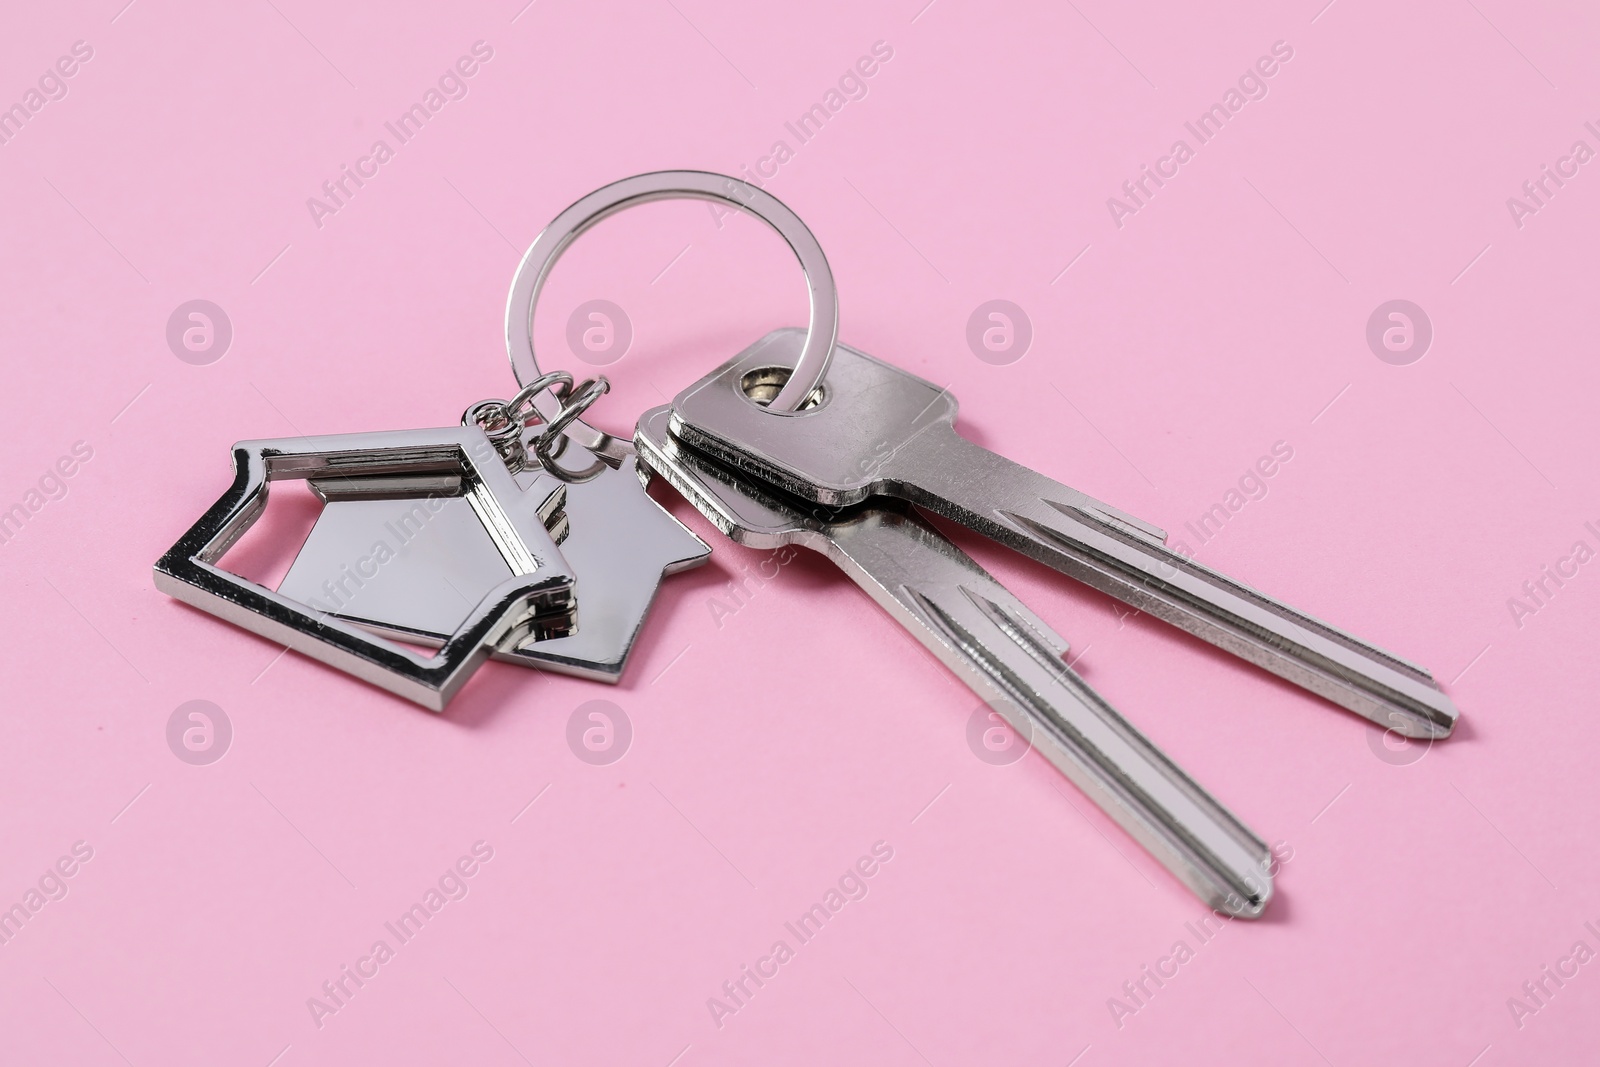 Photo of Metallic keys with keychains in shape of houses on pink background